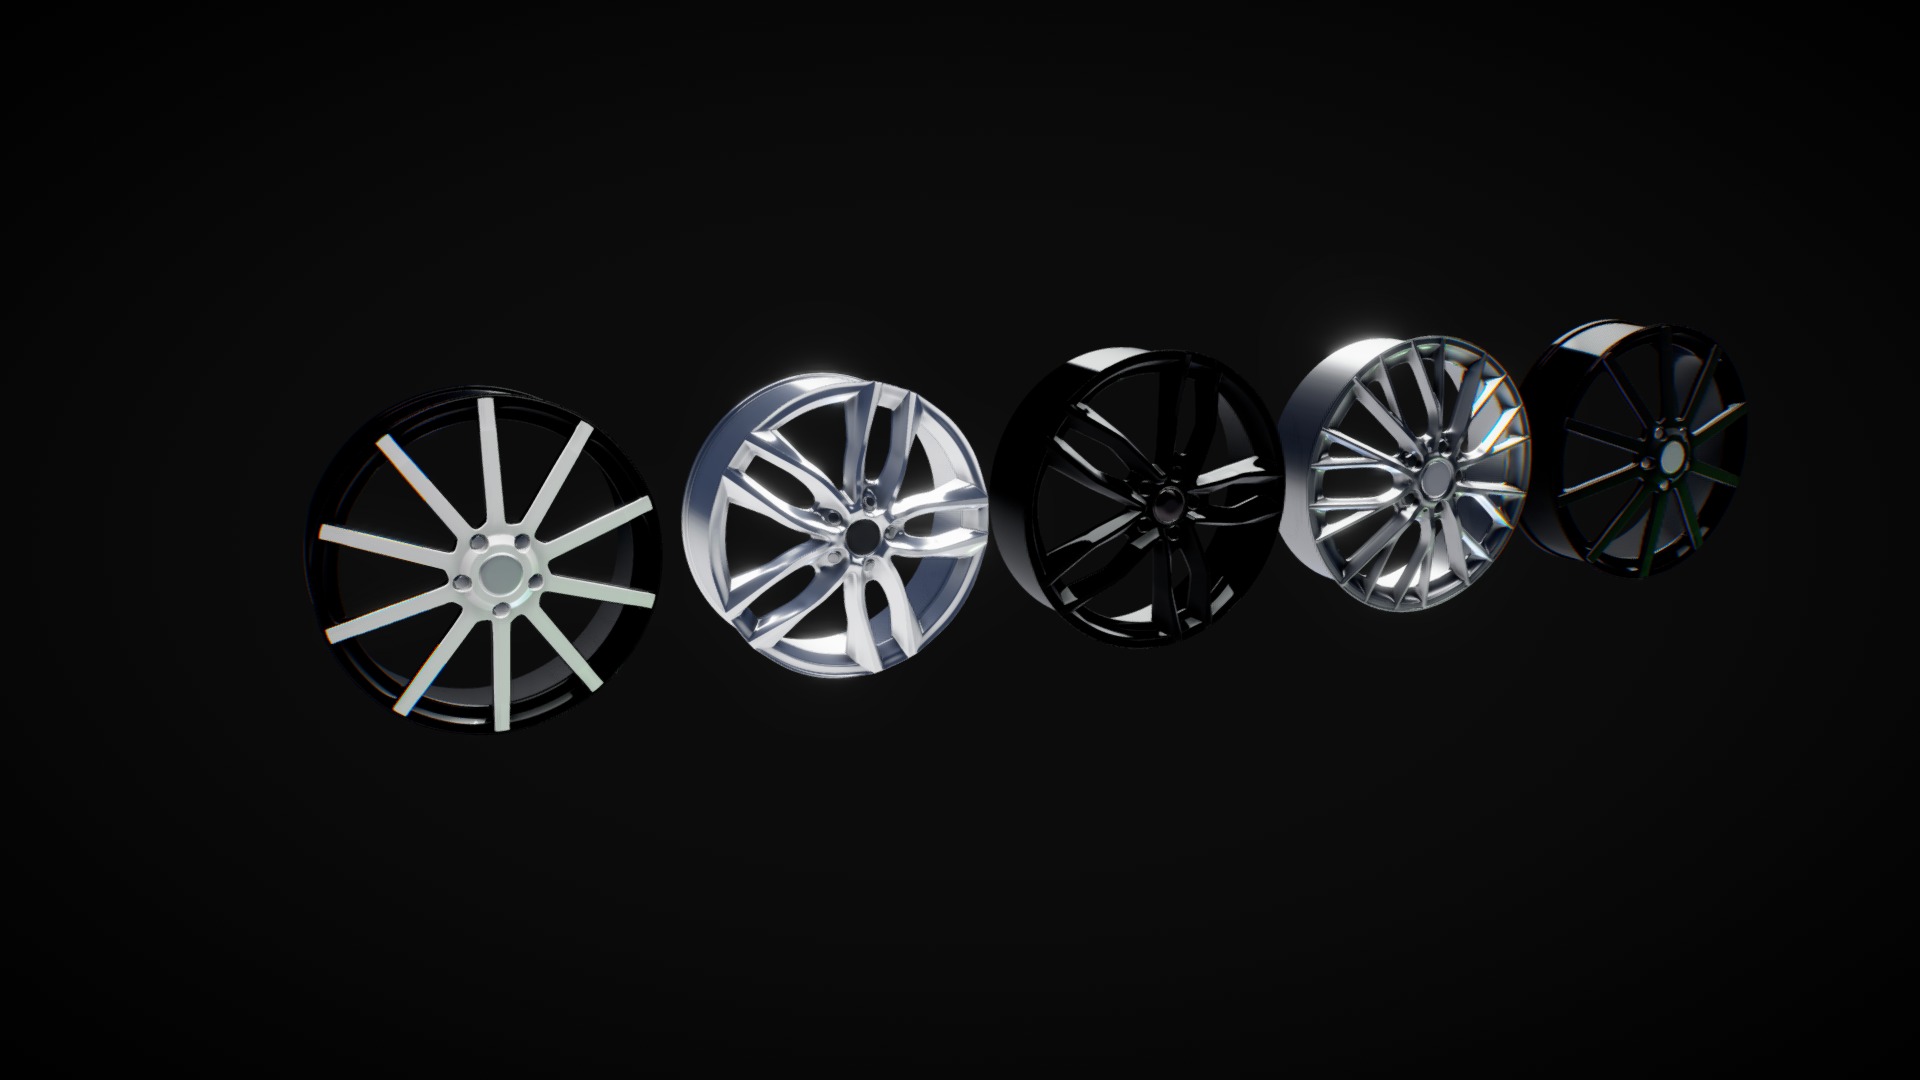 3D model Wheels - This is a 3D model of the Wheels. The 3D model is about a group of black and white emblems.